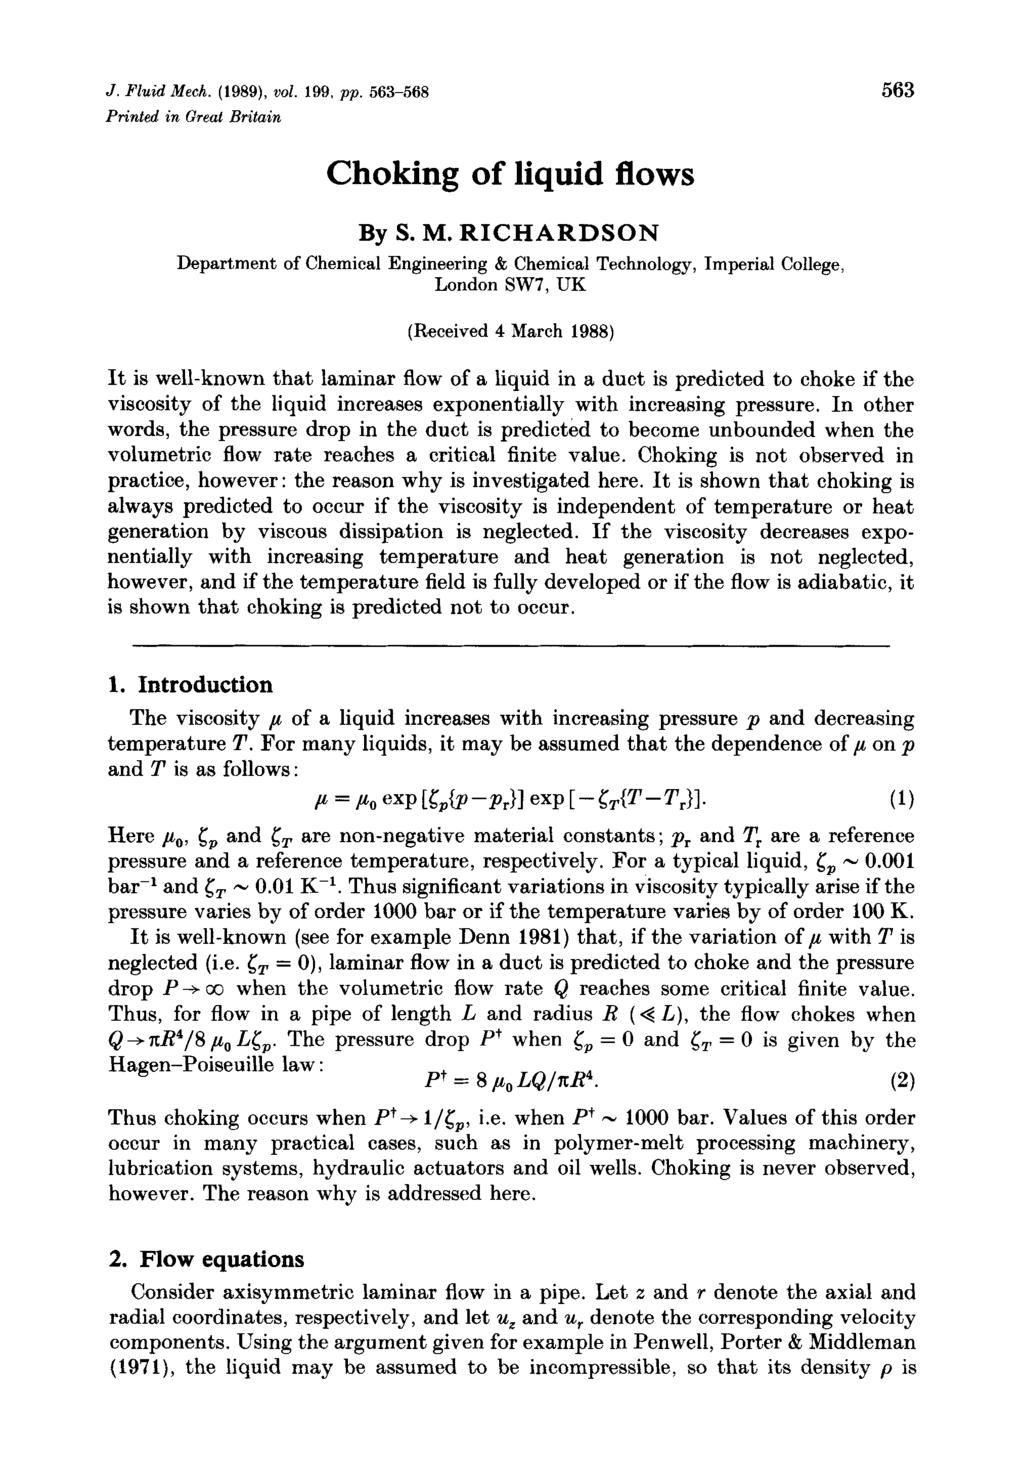 J. Fluid Mech. (989), vol. 99, pp. 563-568 Printed in Great Britain 563 Choking of liquid flows By S. M. RICHARDSON Department of Chemical Engineering & Chemical Technology, Imperial College, London SW7.